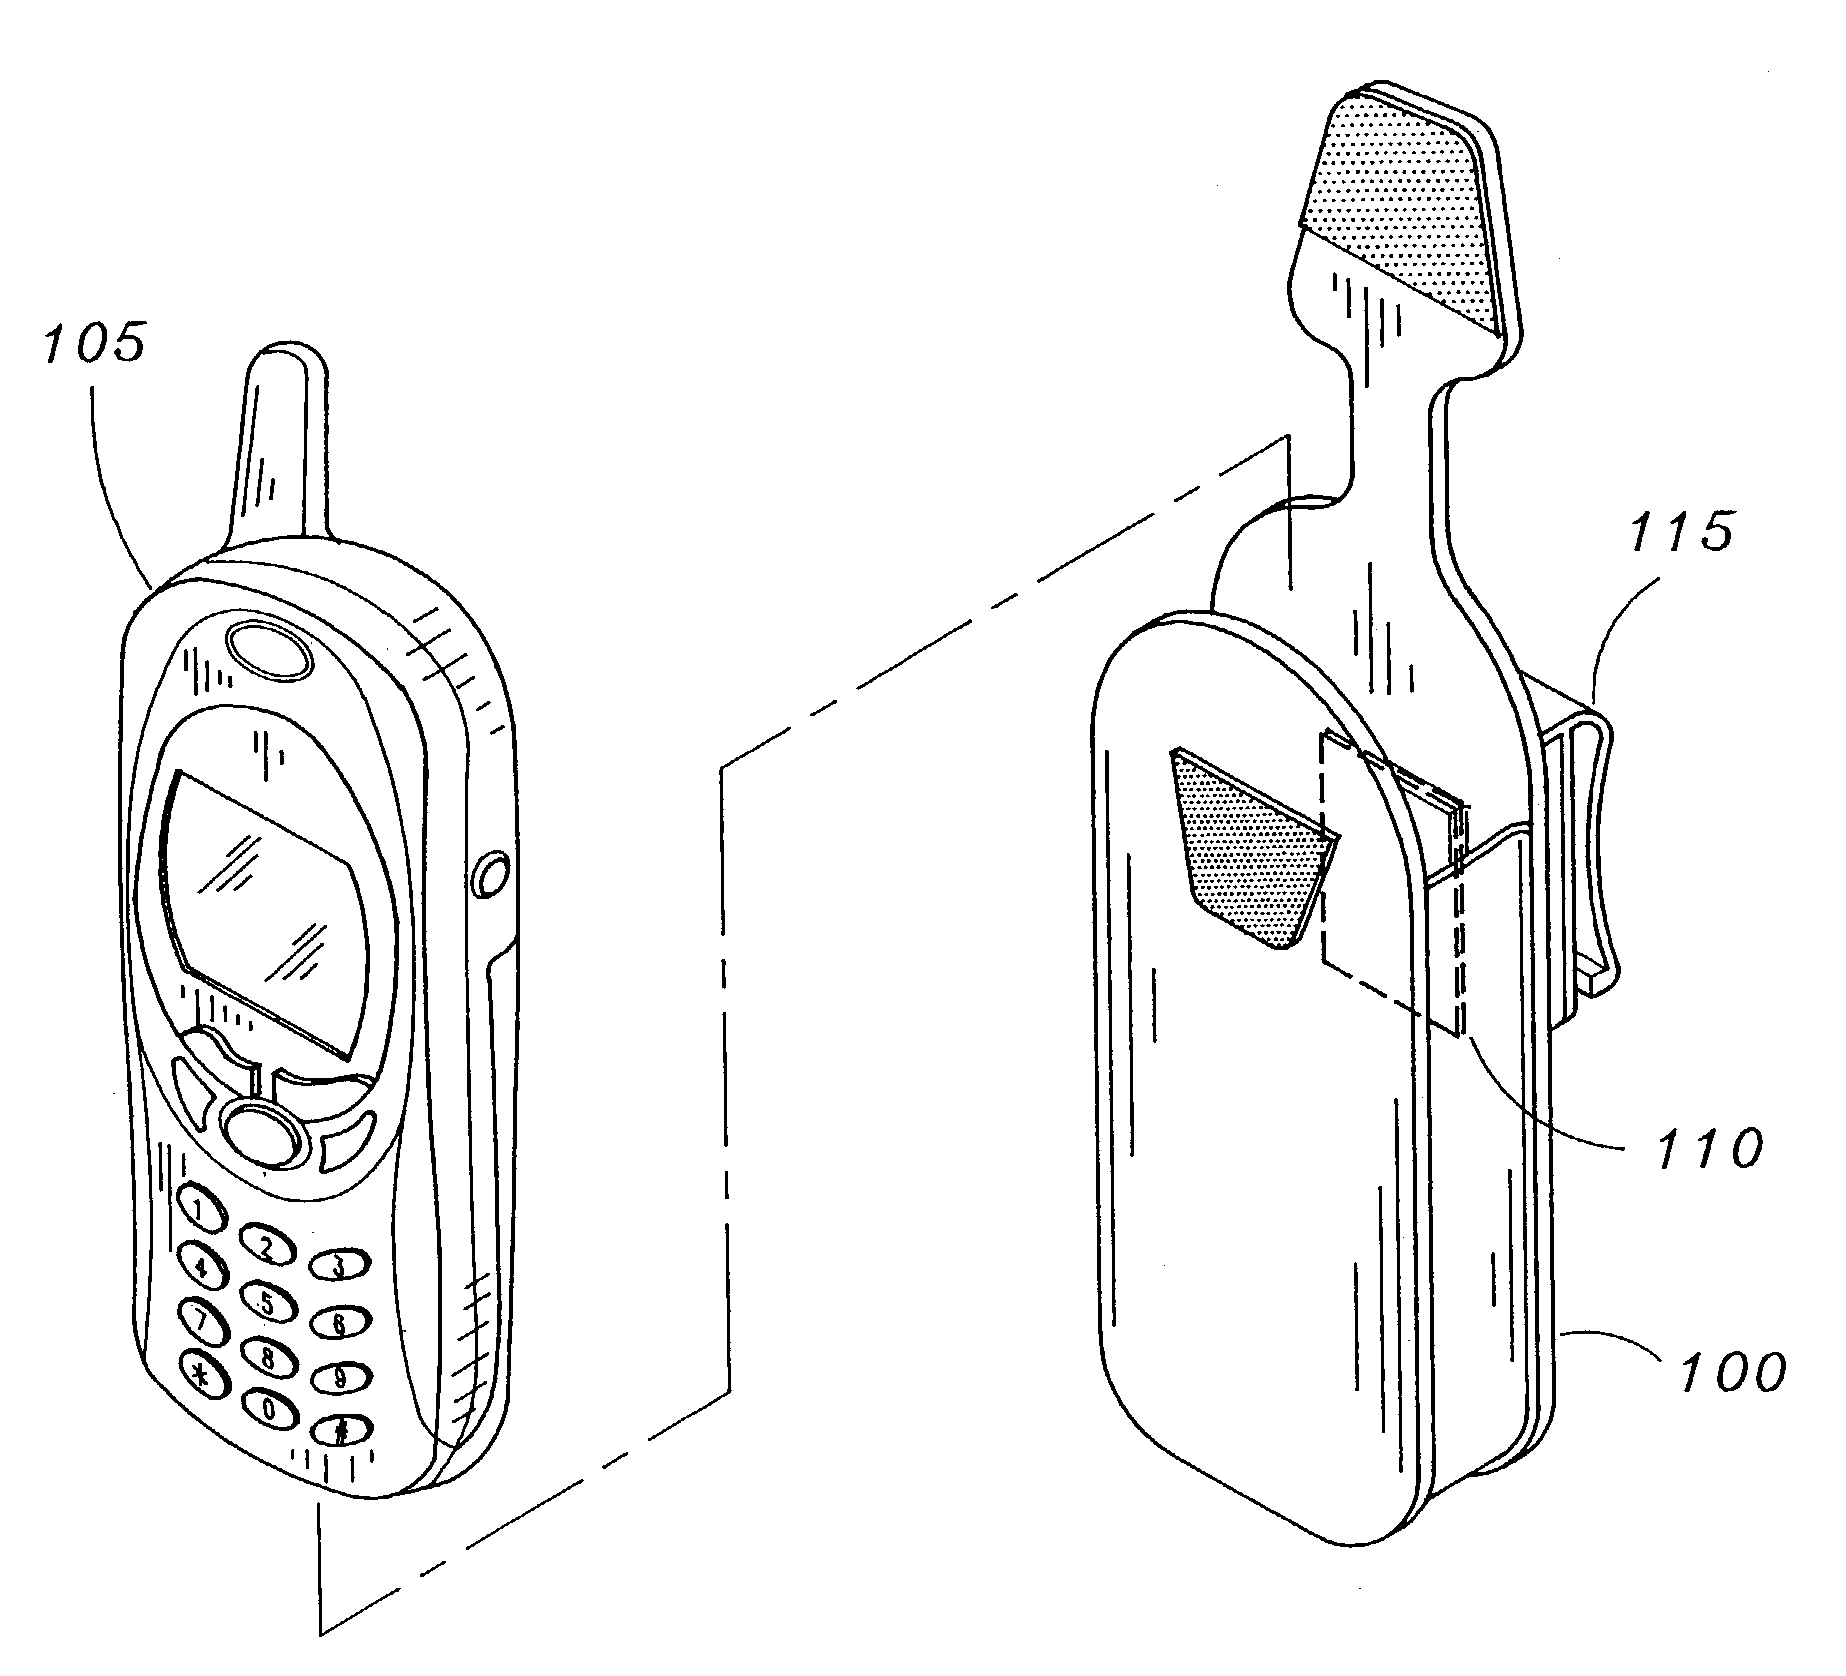 SAR optimized receptacle for mobile devices